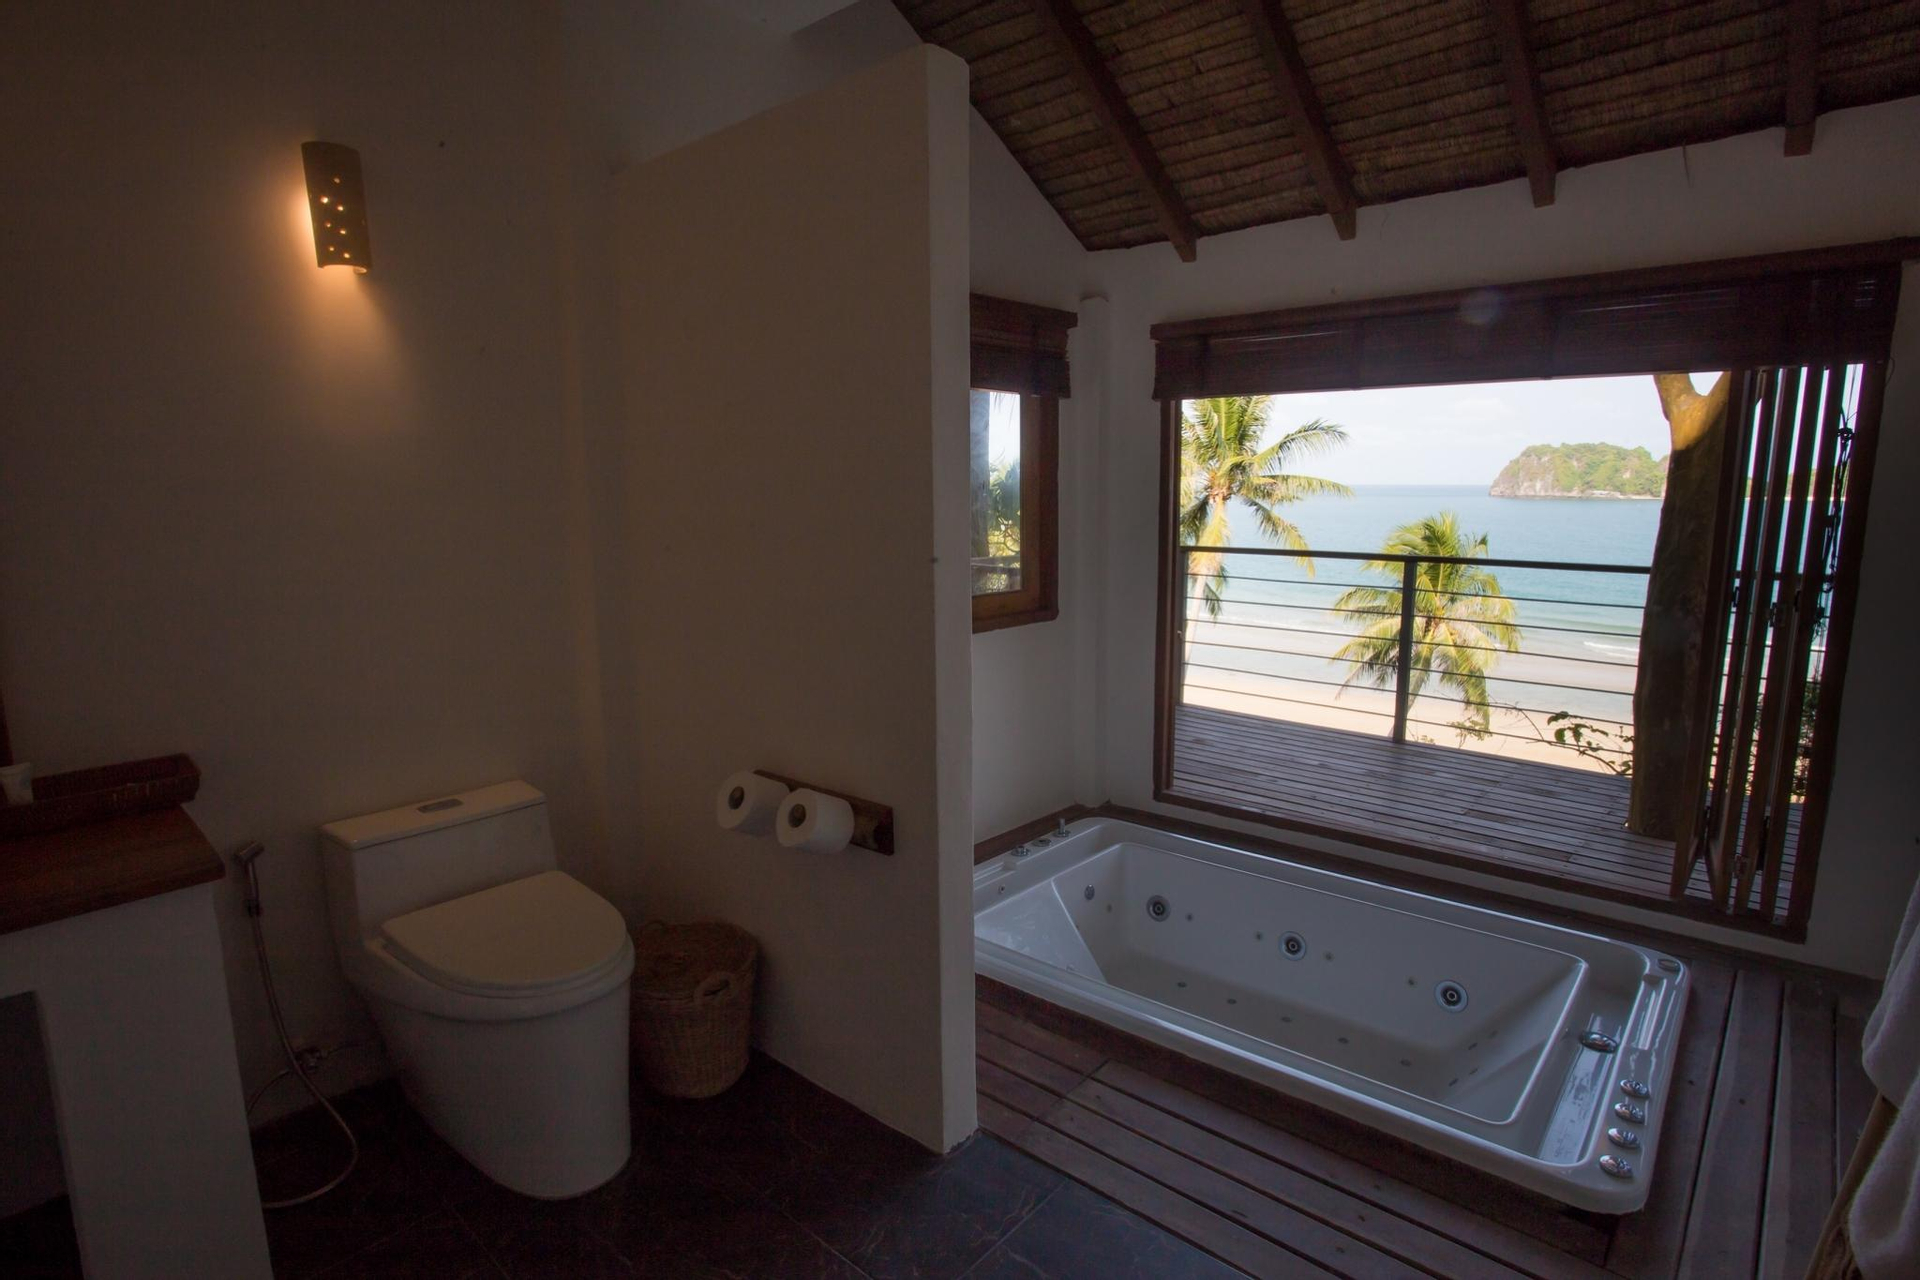 Bedroom 4, The Nest Private Beach Resort, Muang Chumphon